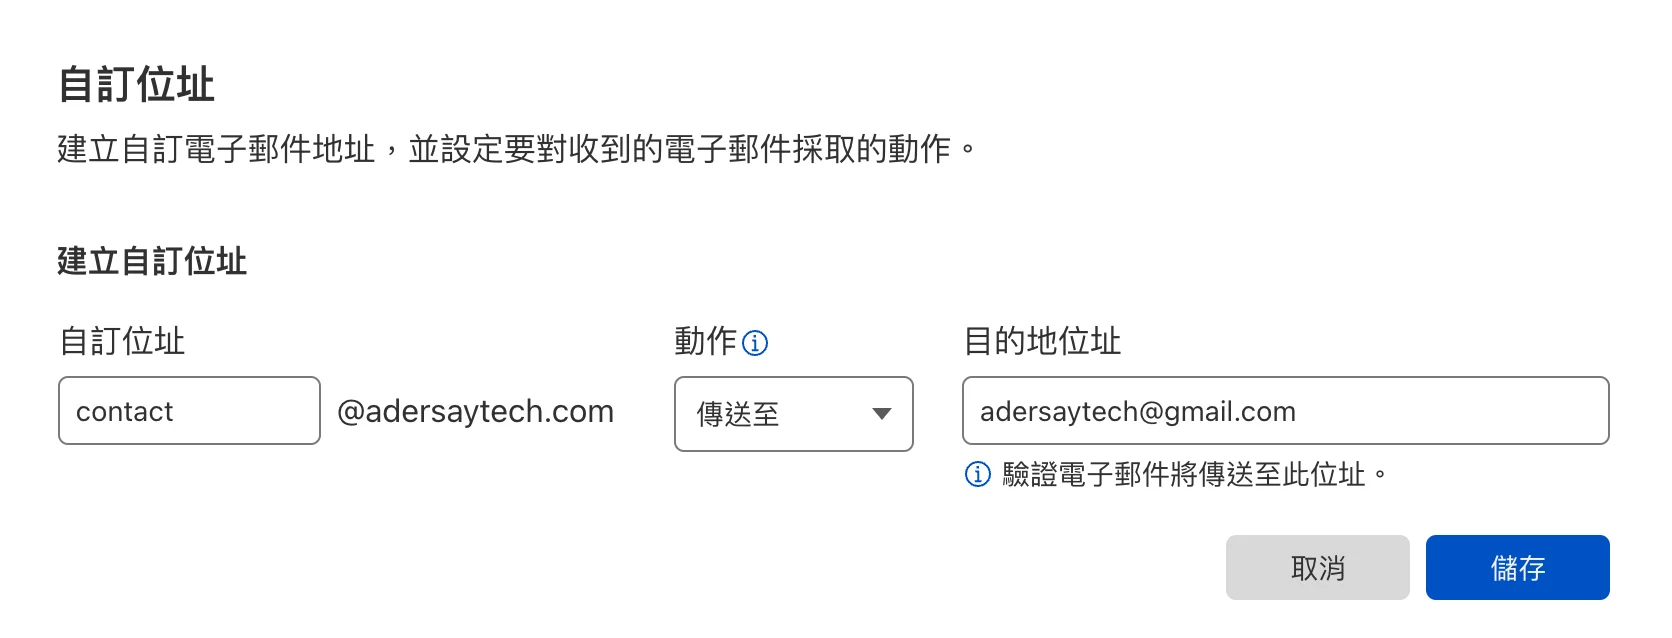 Cloudflare Email Routing 電子郵件路由，可免費自訂網域信箱！ 15